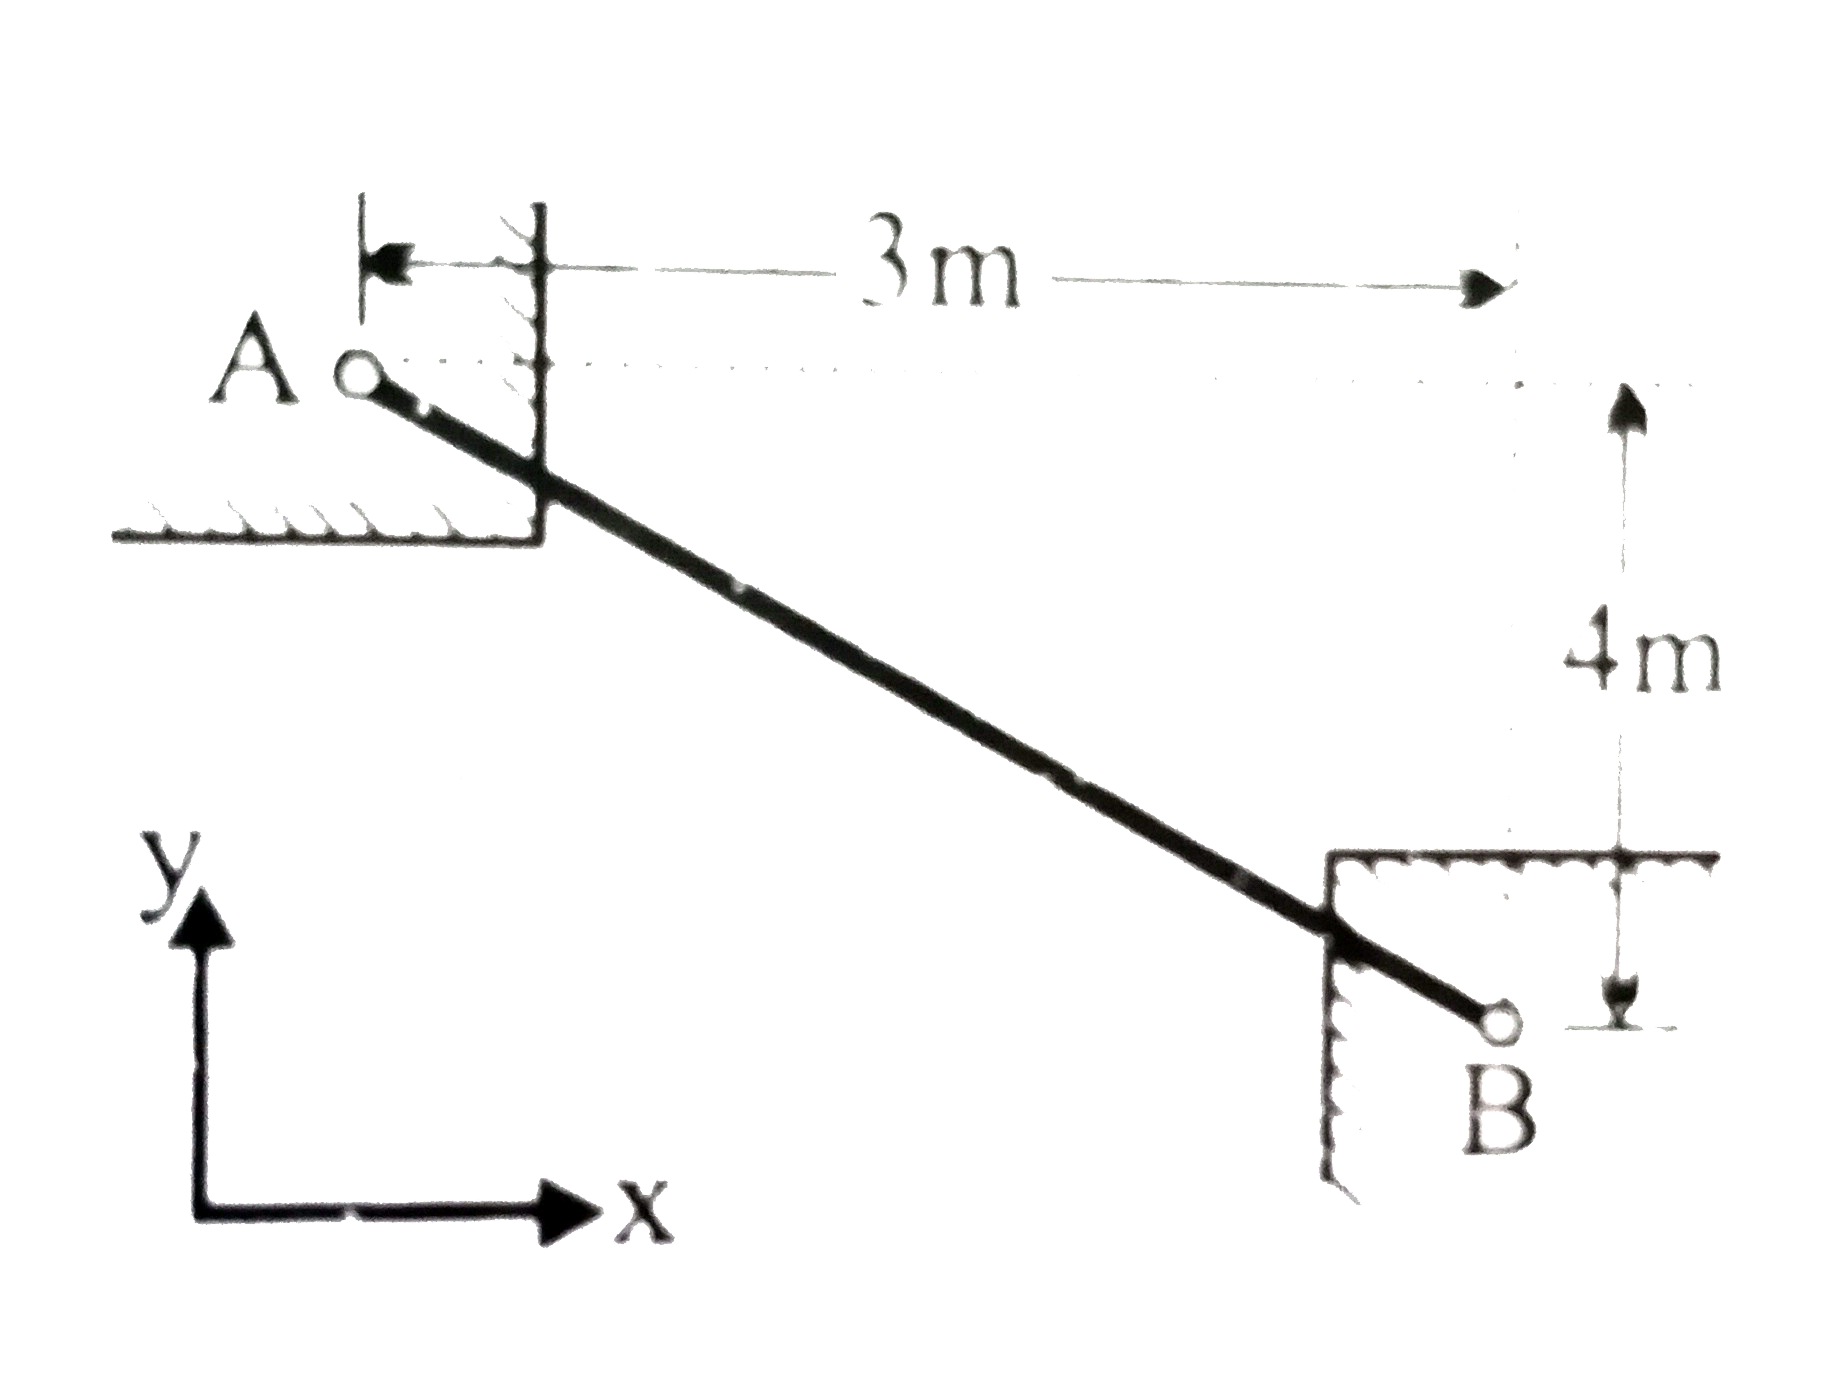 A light cable stretched between the fixed supports A and B is under a tension T of 1000 N. Express the tension as a vector using the unit vectors hati and hatj, first, as a force vecT(A) acting on A and second, as a force vecT(B) acting on B.